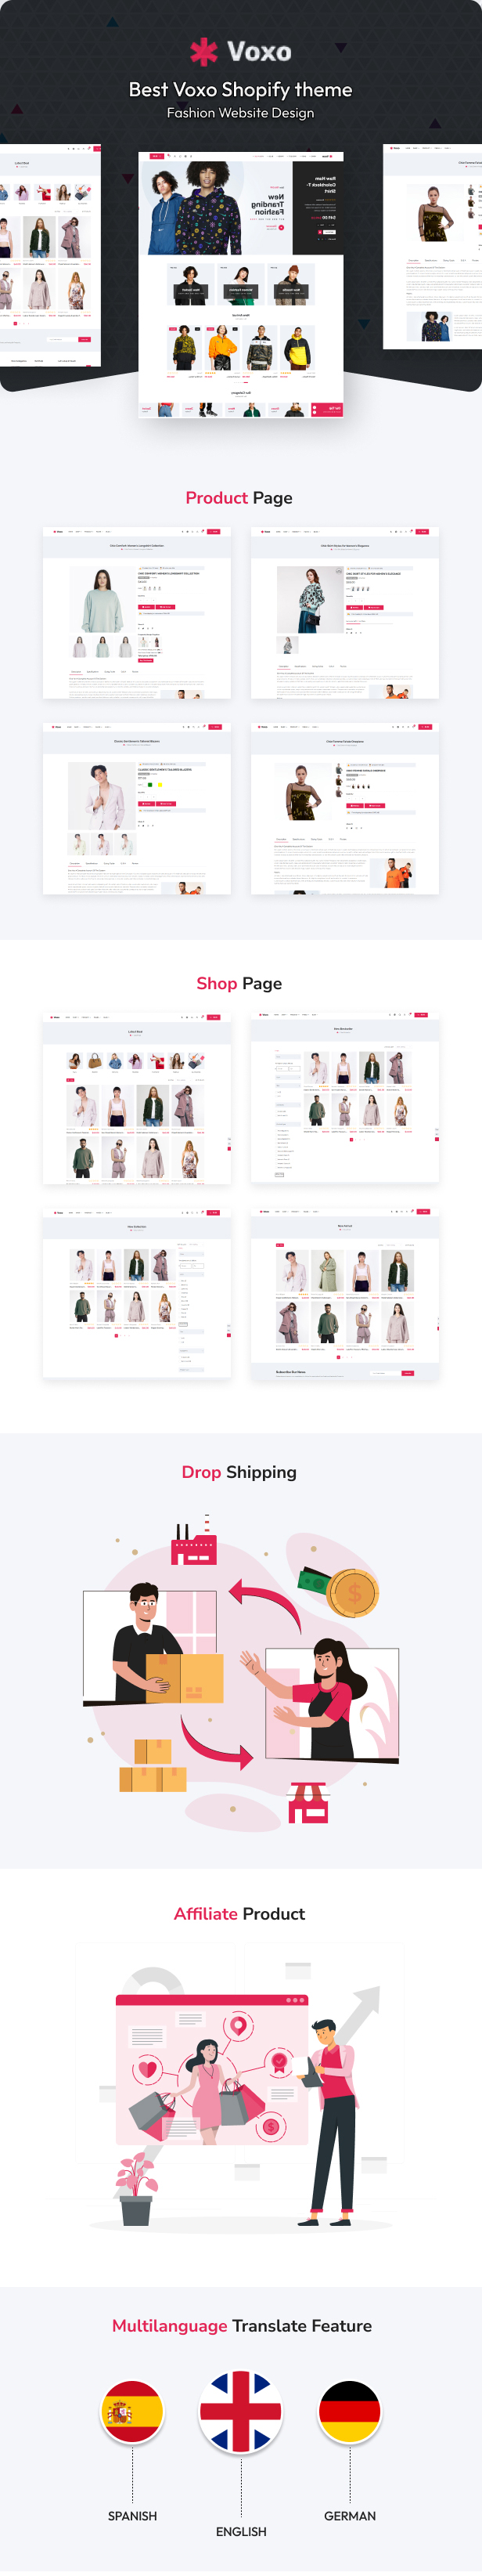 Voxo - Multipurpose Shopify Theme. Fast, Clean, and Flexible. OS 2.0